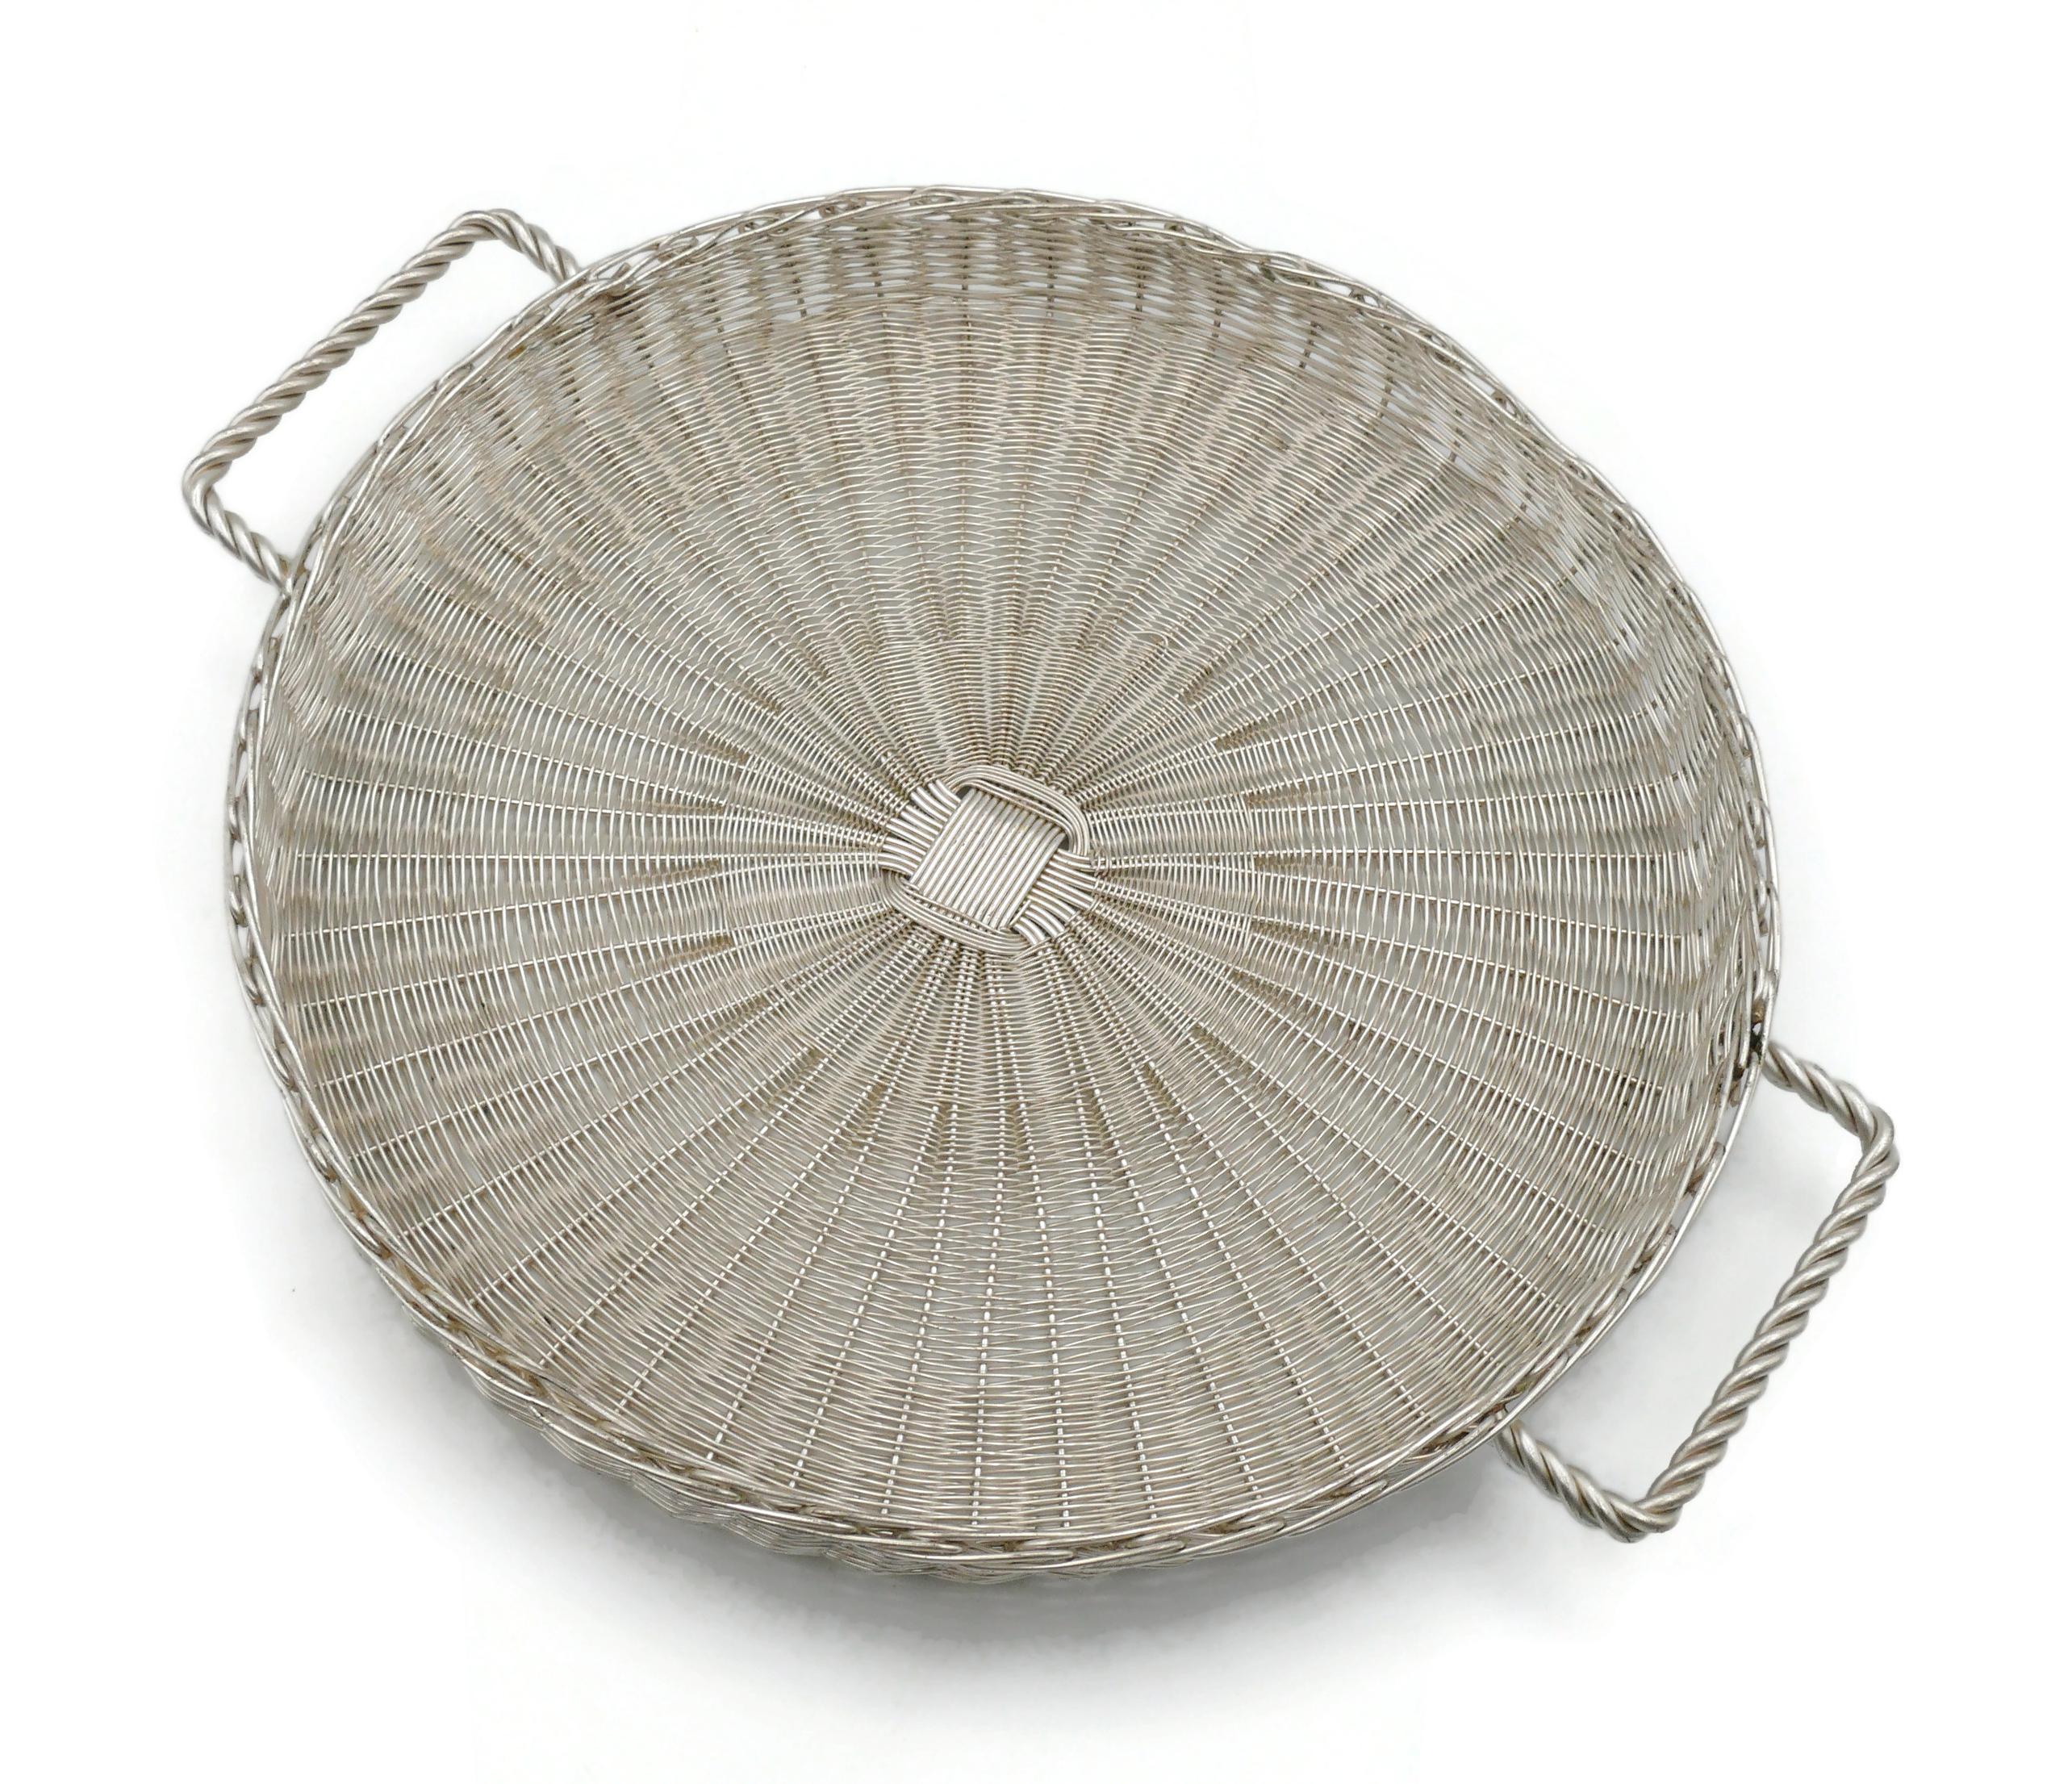 CHRISTIAN DIOR Home Collection vintage silver plated wicker style basket with handles.

Embossed CHRISTIAN DIOR.

Indicative measurements : diameter approx. 26.5 cm (10.43 inches) / total width including the handles approx. 31.5 cm (12.40 inches) /